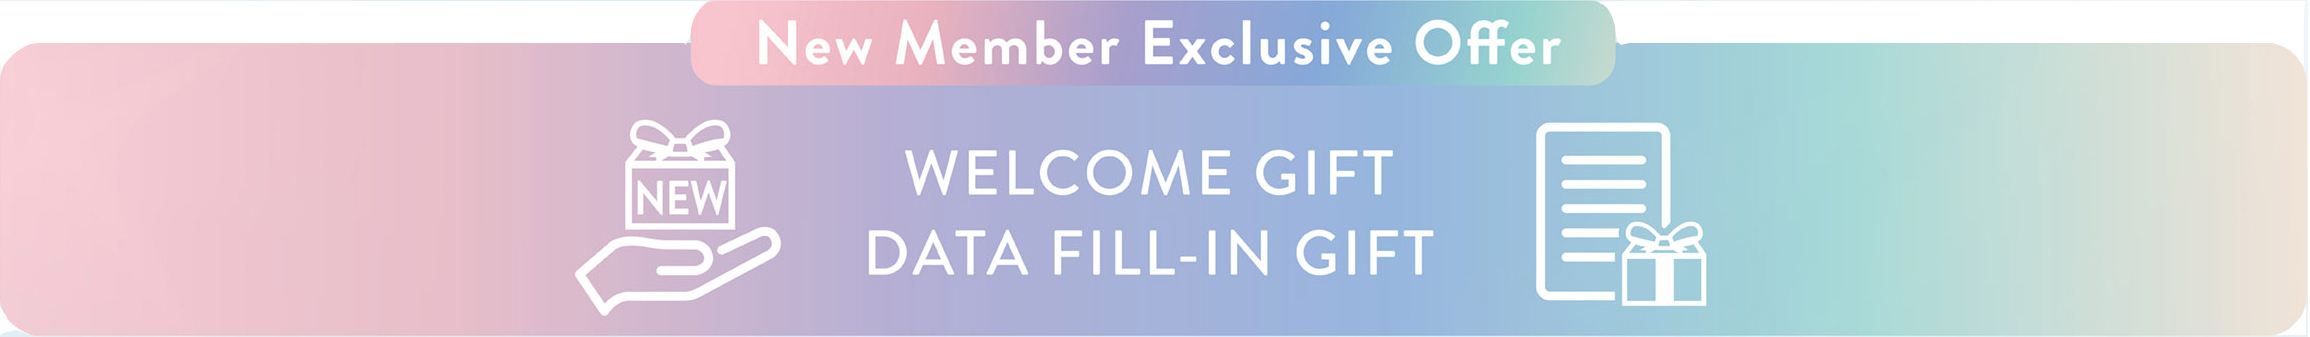 New Member  Exclusive Offer, WELCOM GIFT DATA FILL-IN GIFT